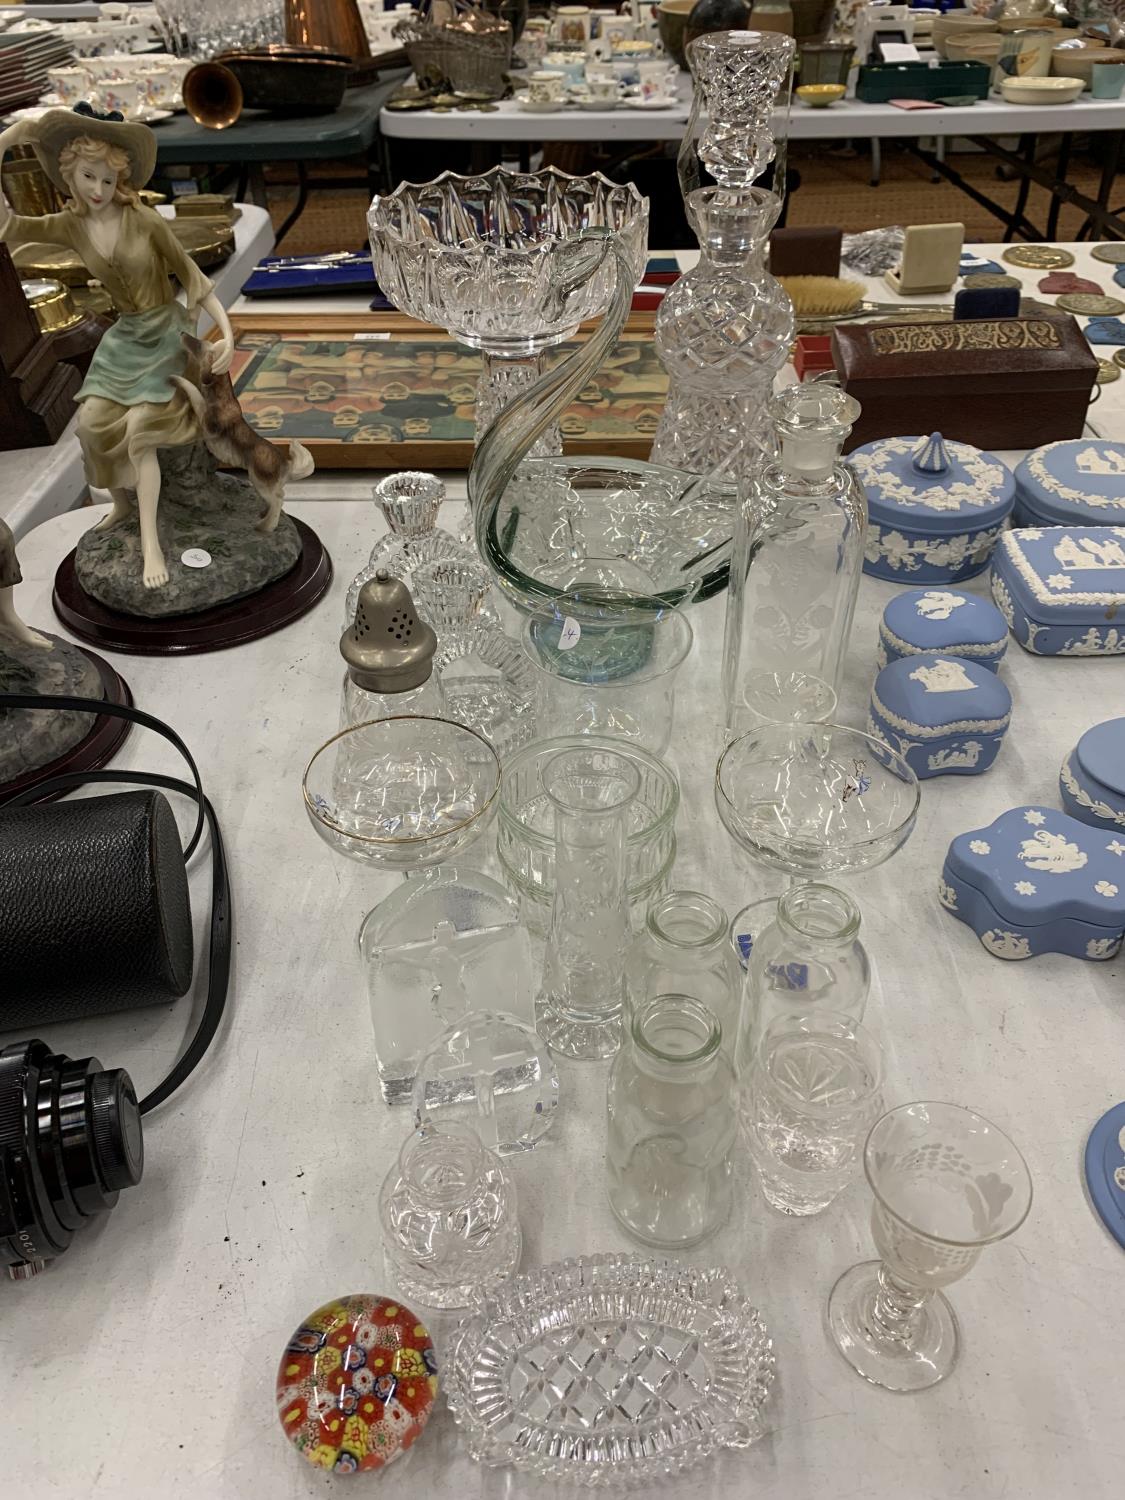 A QUANTITY OF GLASSWARE TO INCLUDE BOWLS, DECANTERS, BABYCHAM GLASSES, PAPERWEIGHTS, BOTTLES, ETC